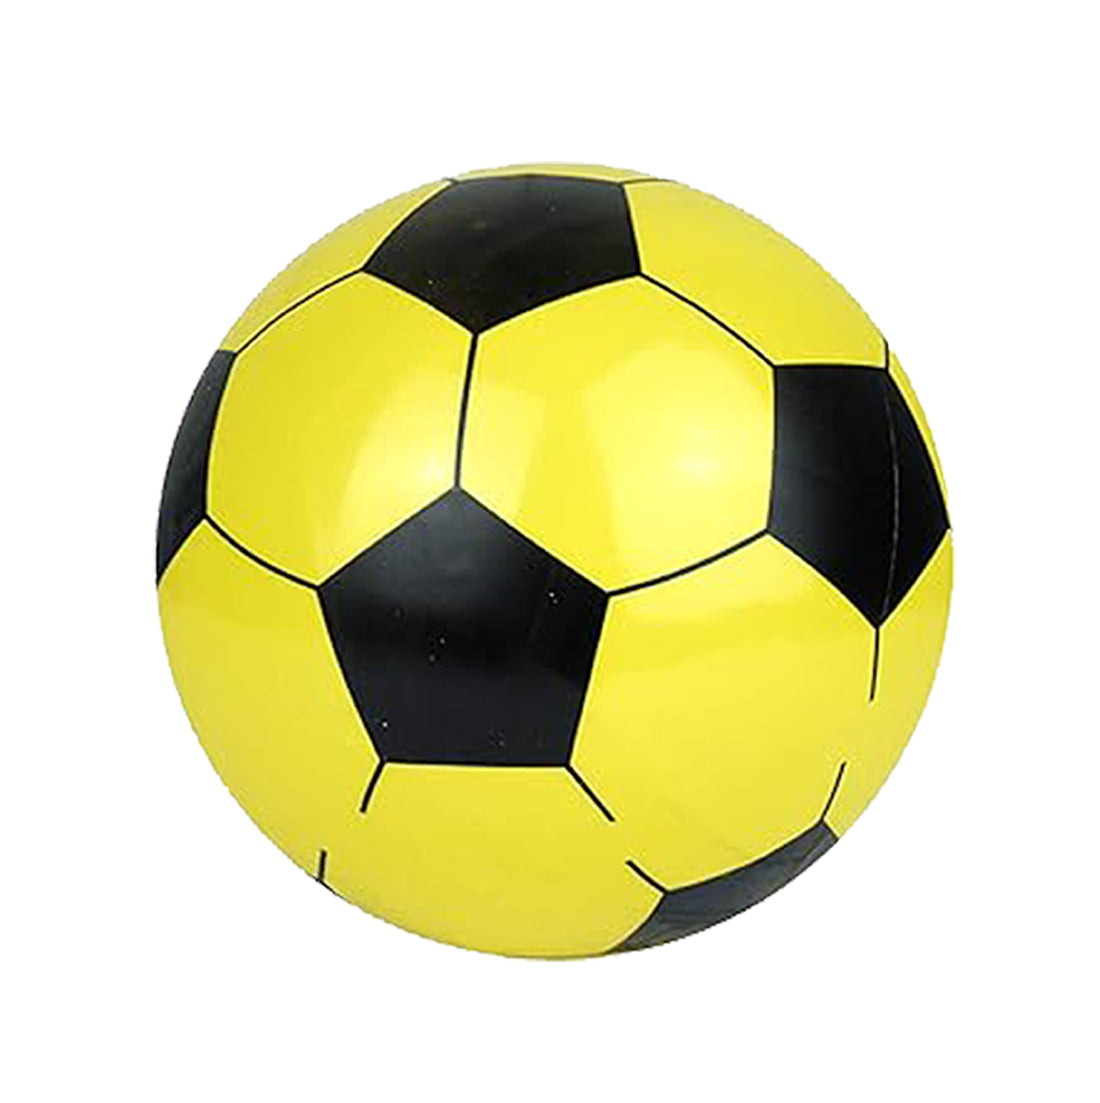 Fashionarie Club Inflatable Football (soccer) Lightweight for Kids Pool Toys Inflatable Beach Ball Soccer Soft Football Garden, Pool, Indoor, Outdoor, Home, Birthday, School & Parties Assorted Colors